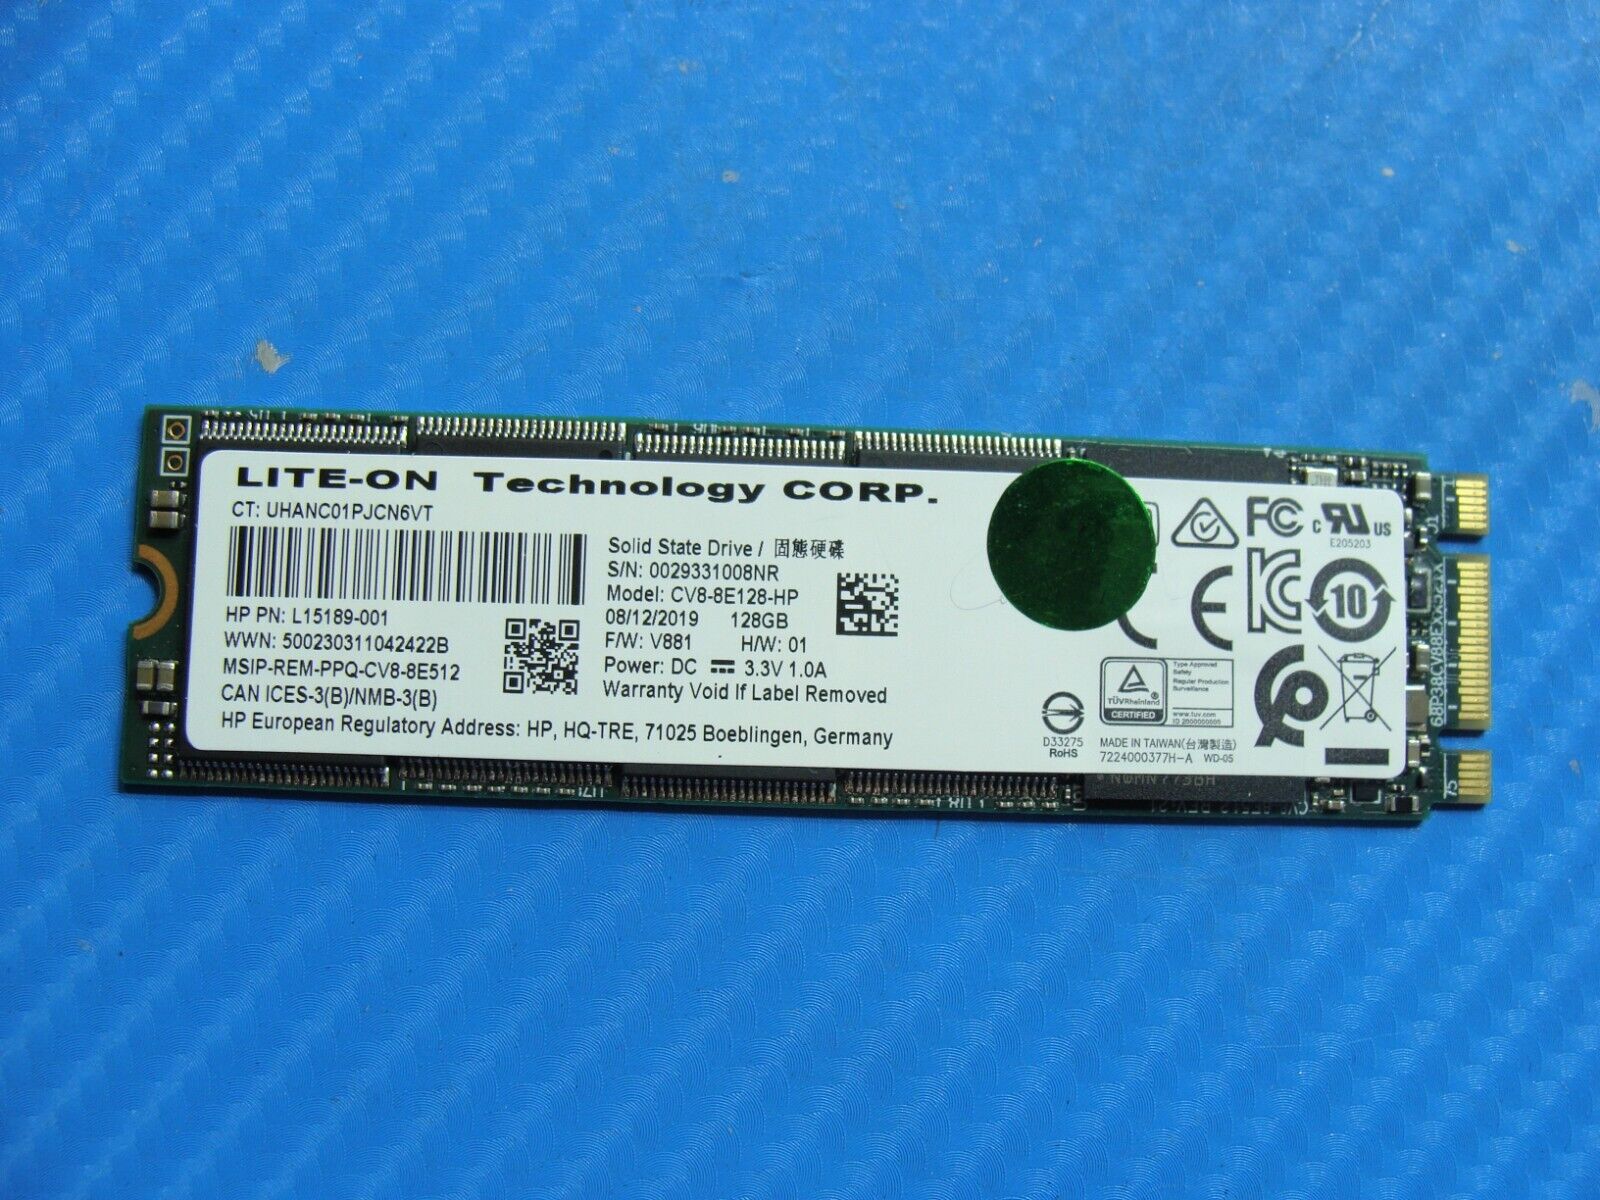 HP 15-dy1751ms Lite-On 128GB M.2 SSD Solid State Drive CV8-8E128-HP L15189-001